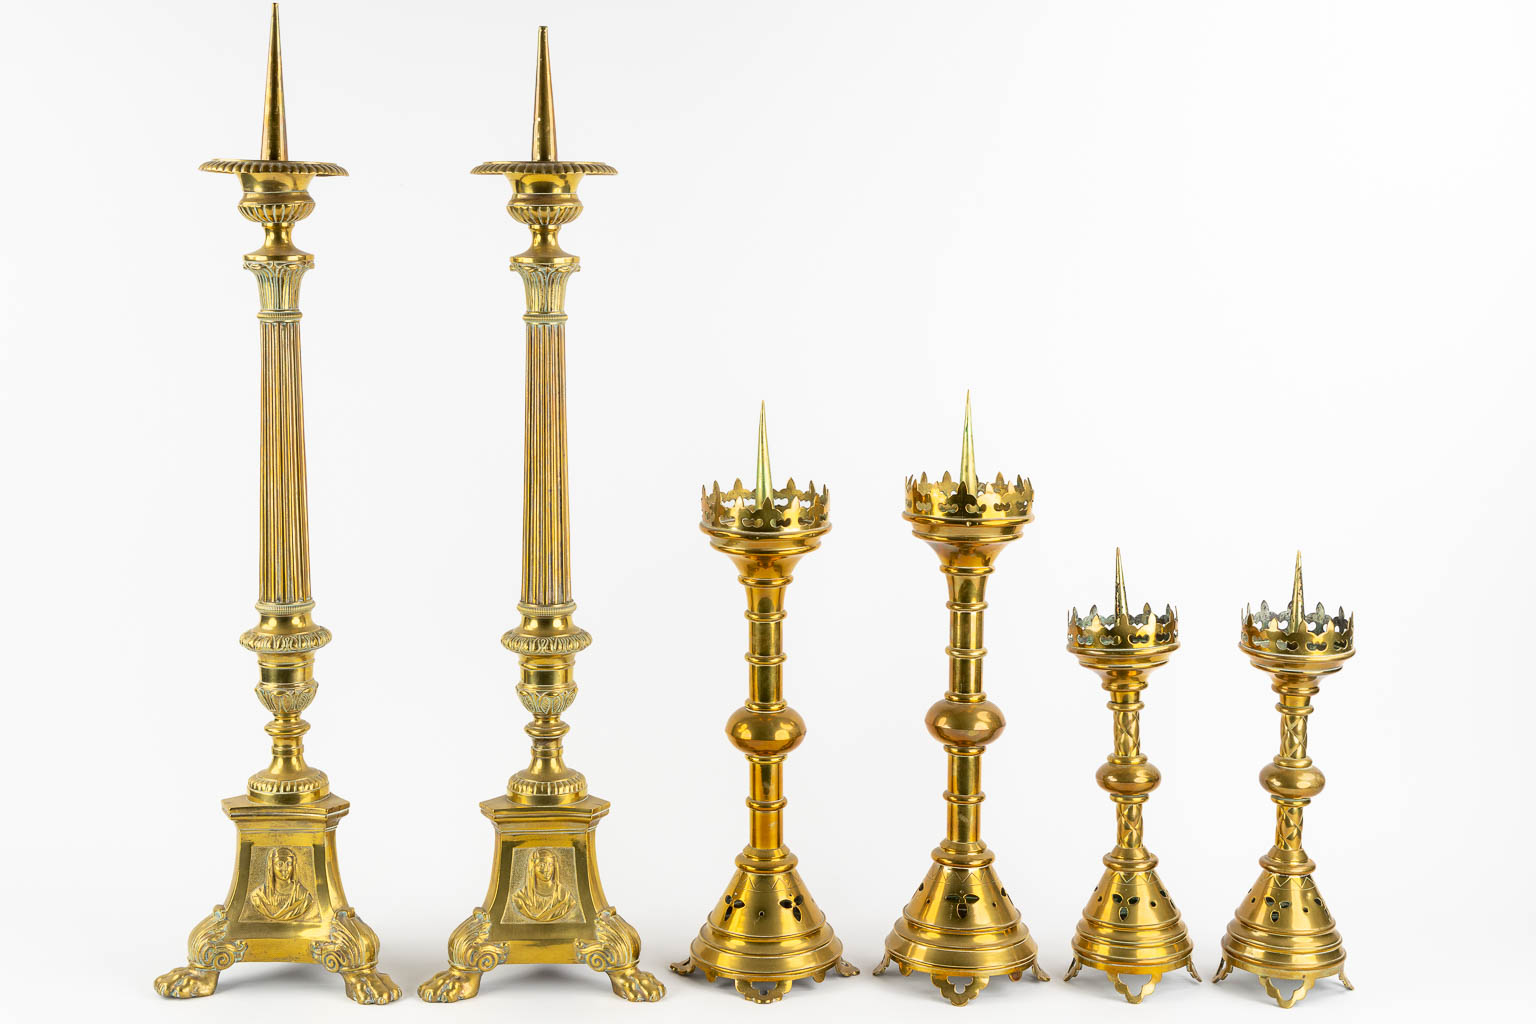 Three pairs of Church candlesticks, brass. Gothic Revival. (H:86 cm) - Image 4 of 16